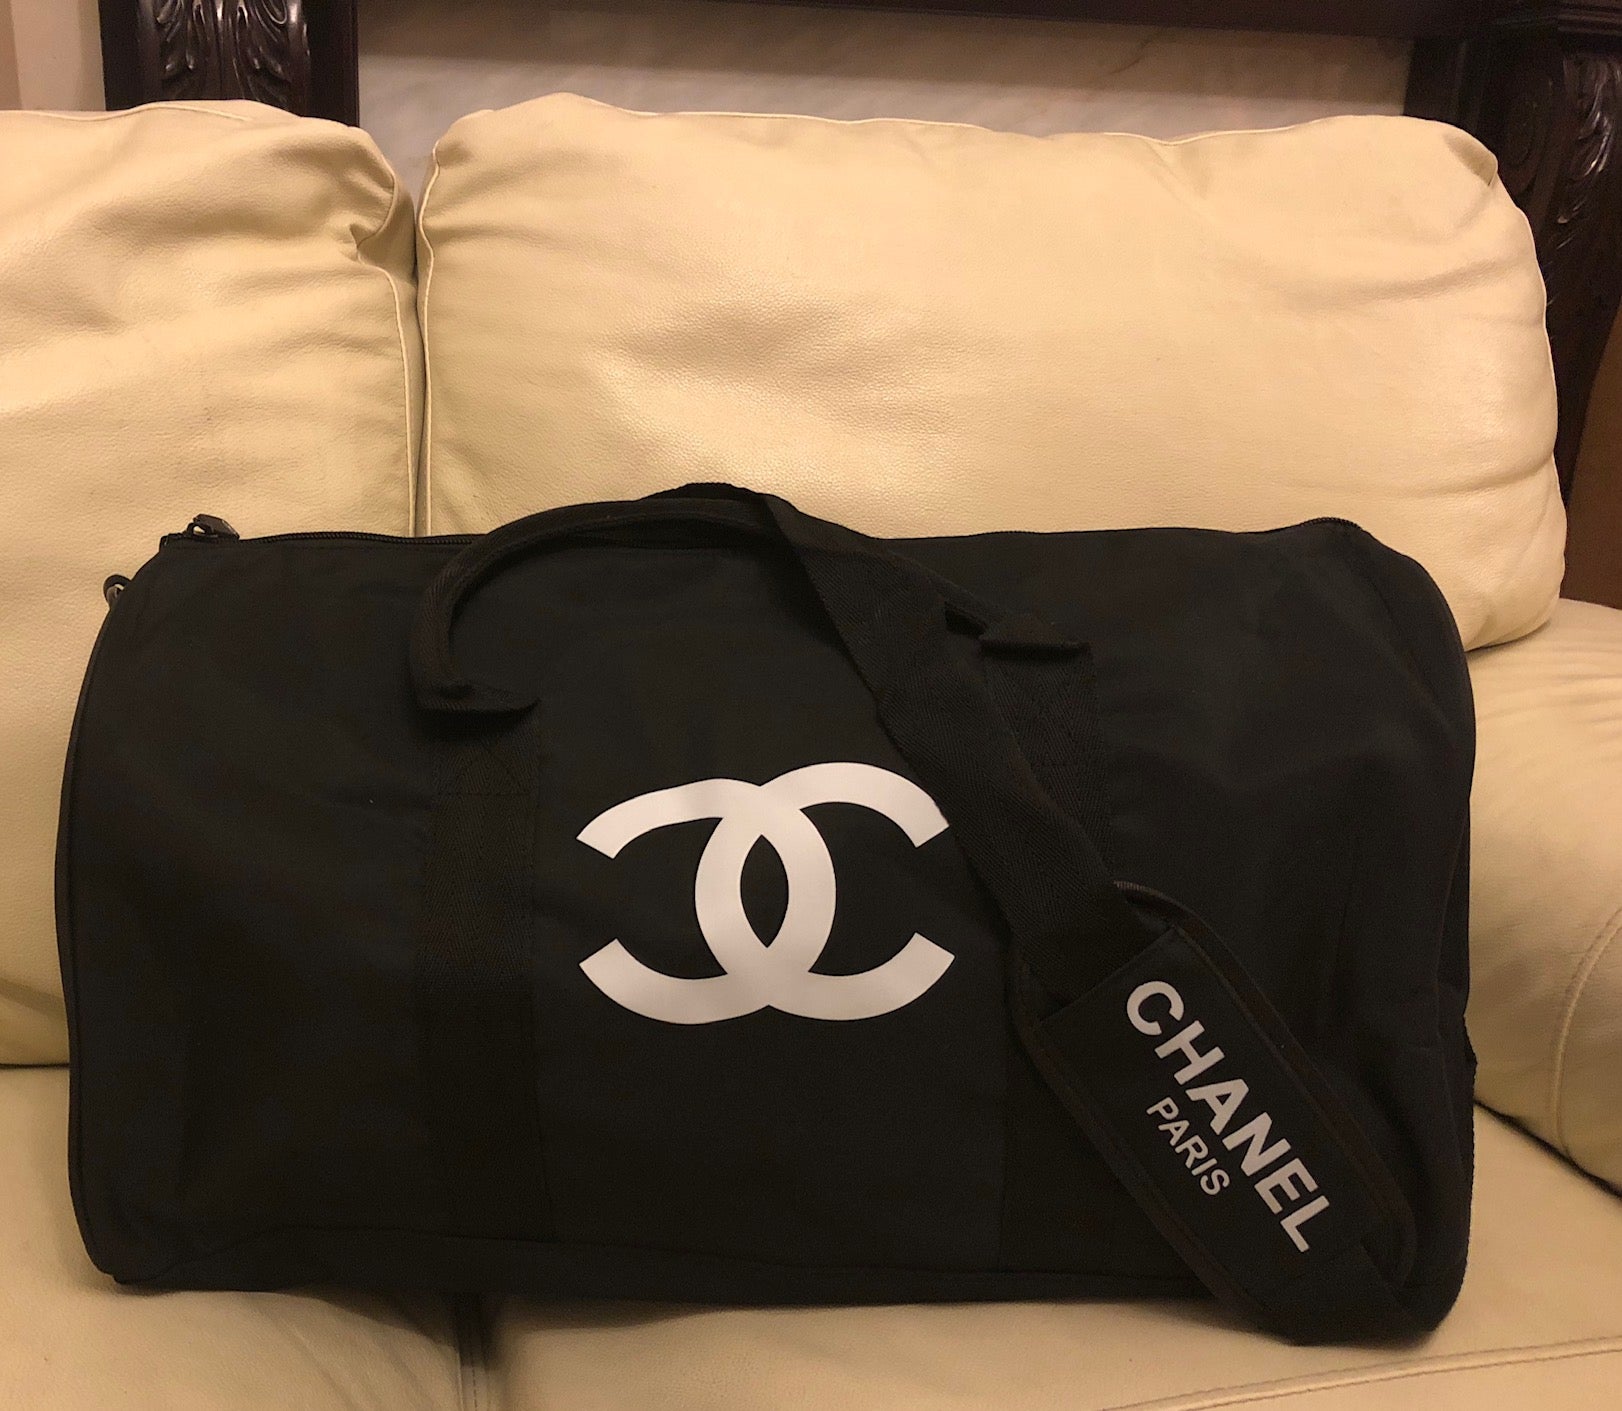 Find more Authentic Vip Chanel Duffle Bag for sale at up to 90% off